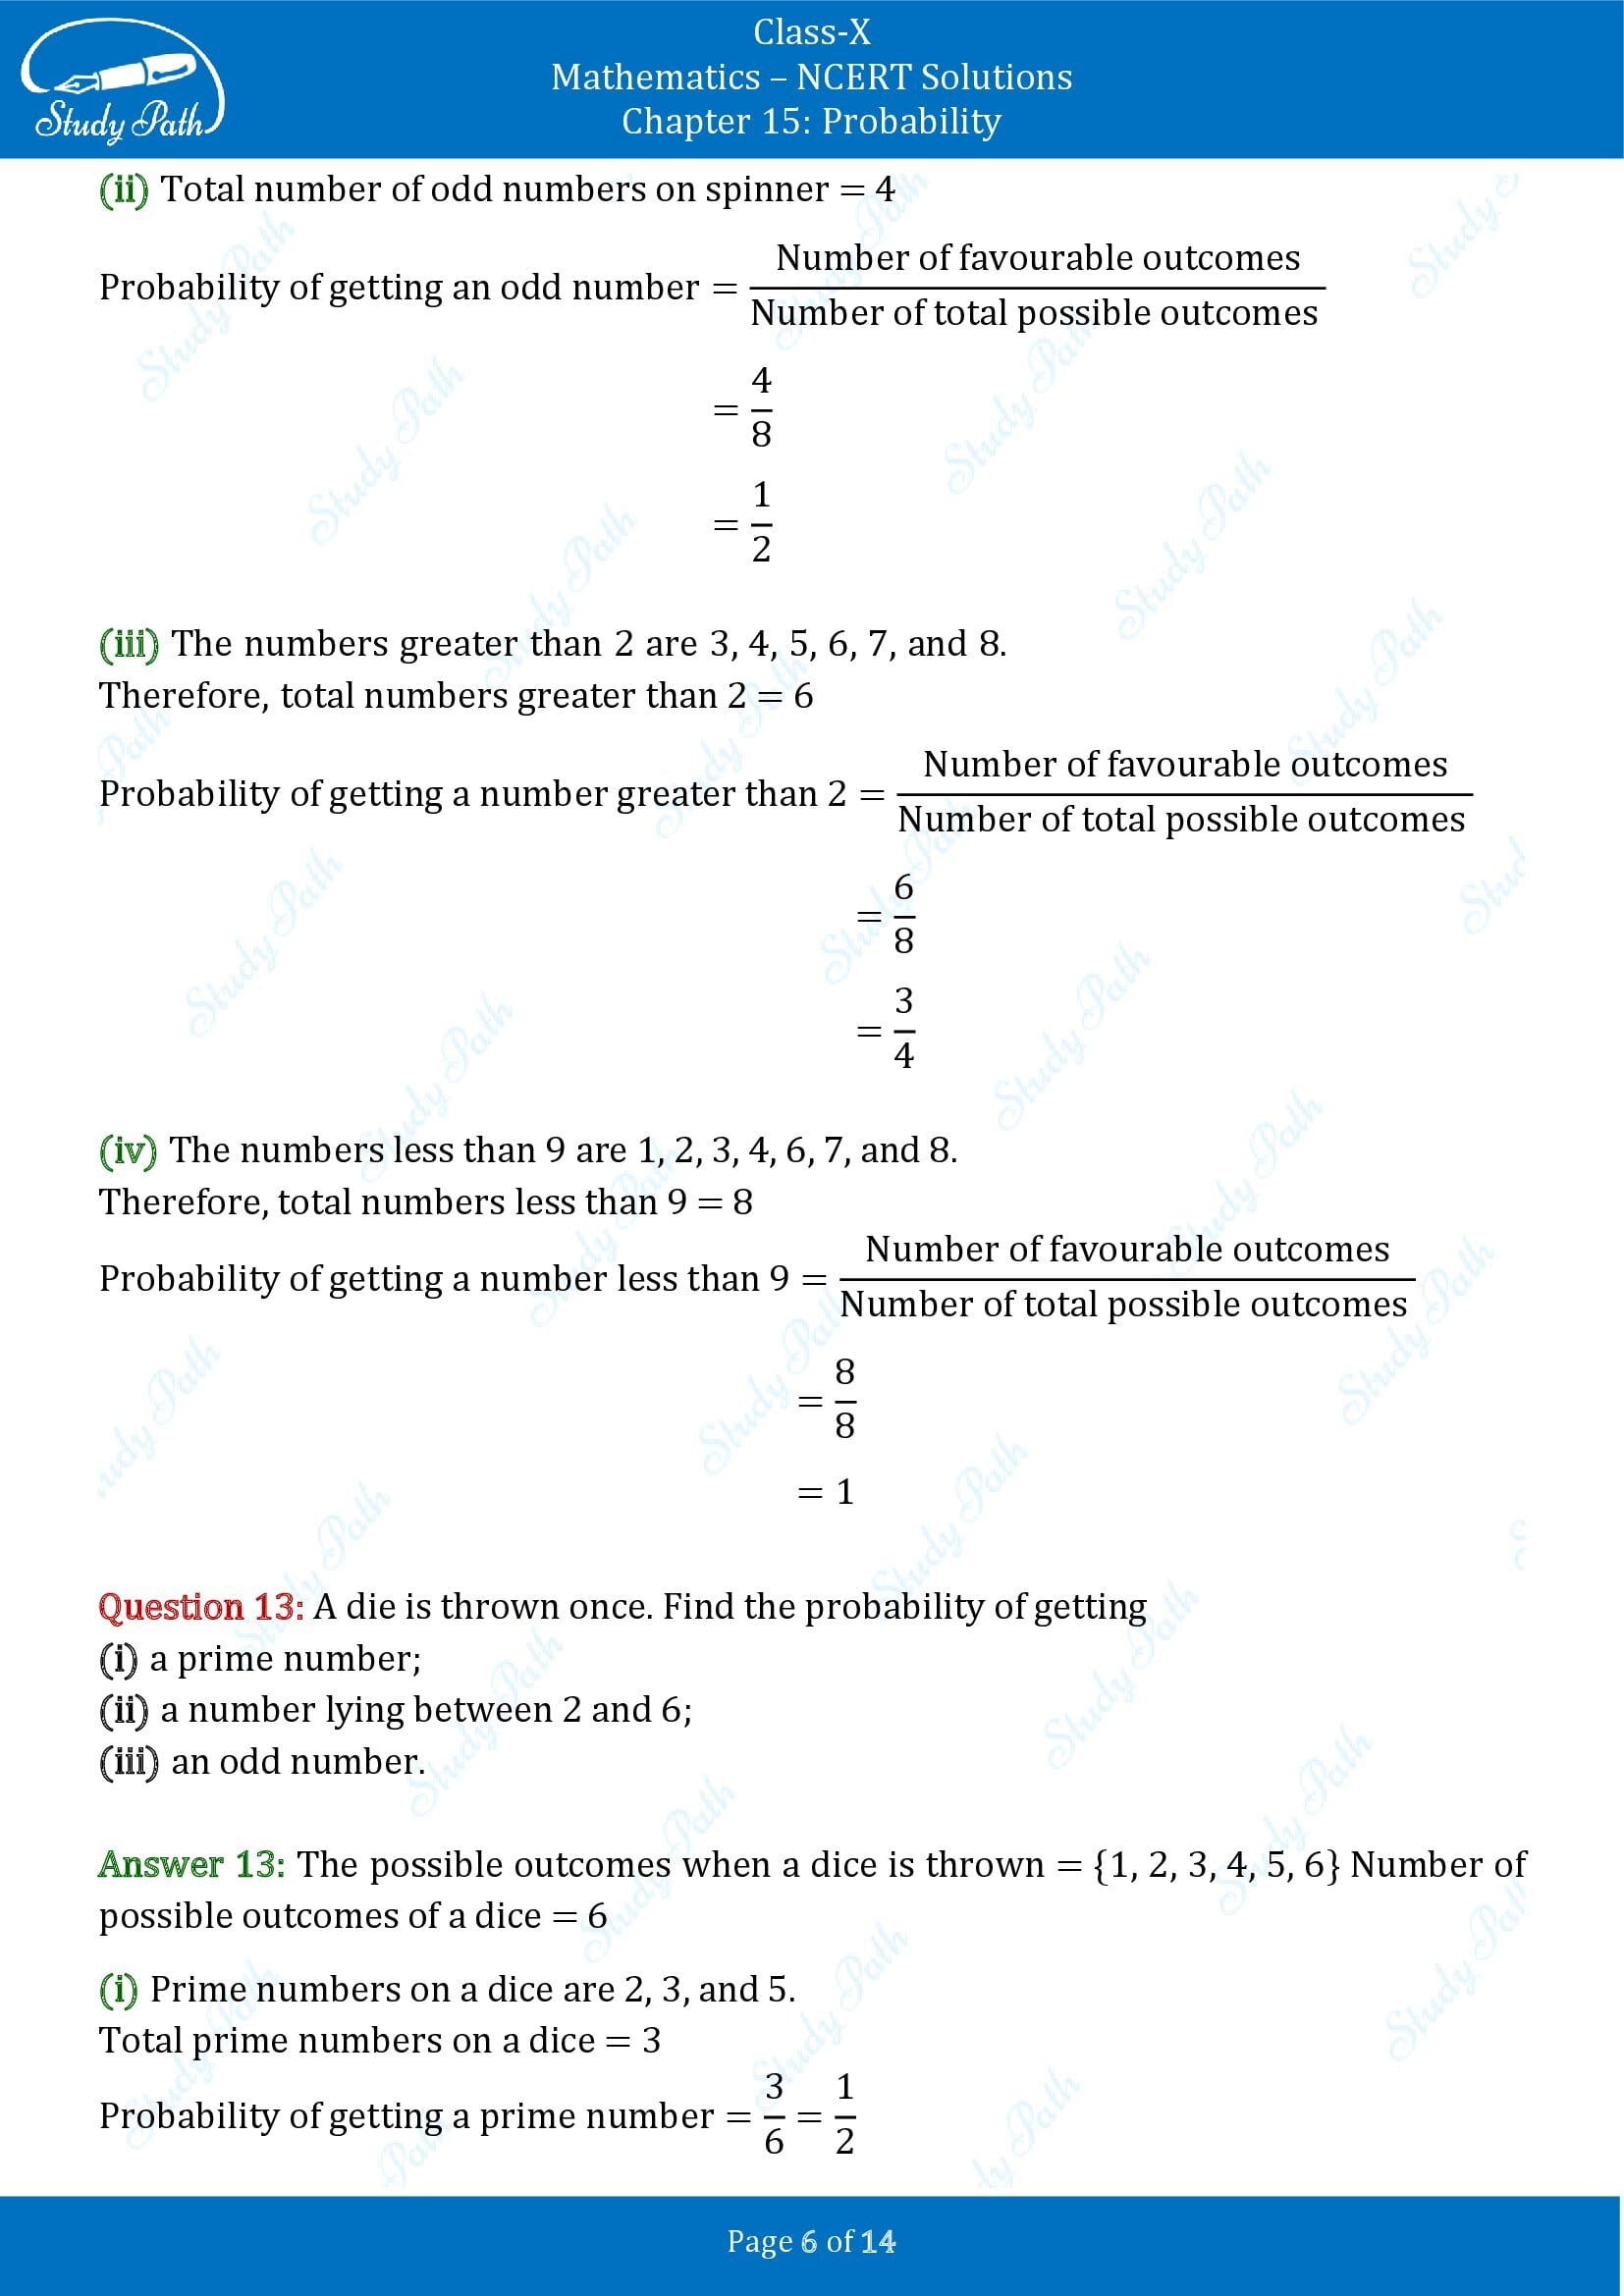 NCERT Solutions for Class 10 Maths Chapter 15 Probability Exercise 15.1 00006